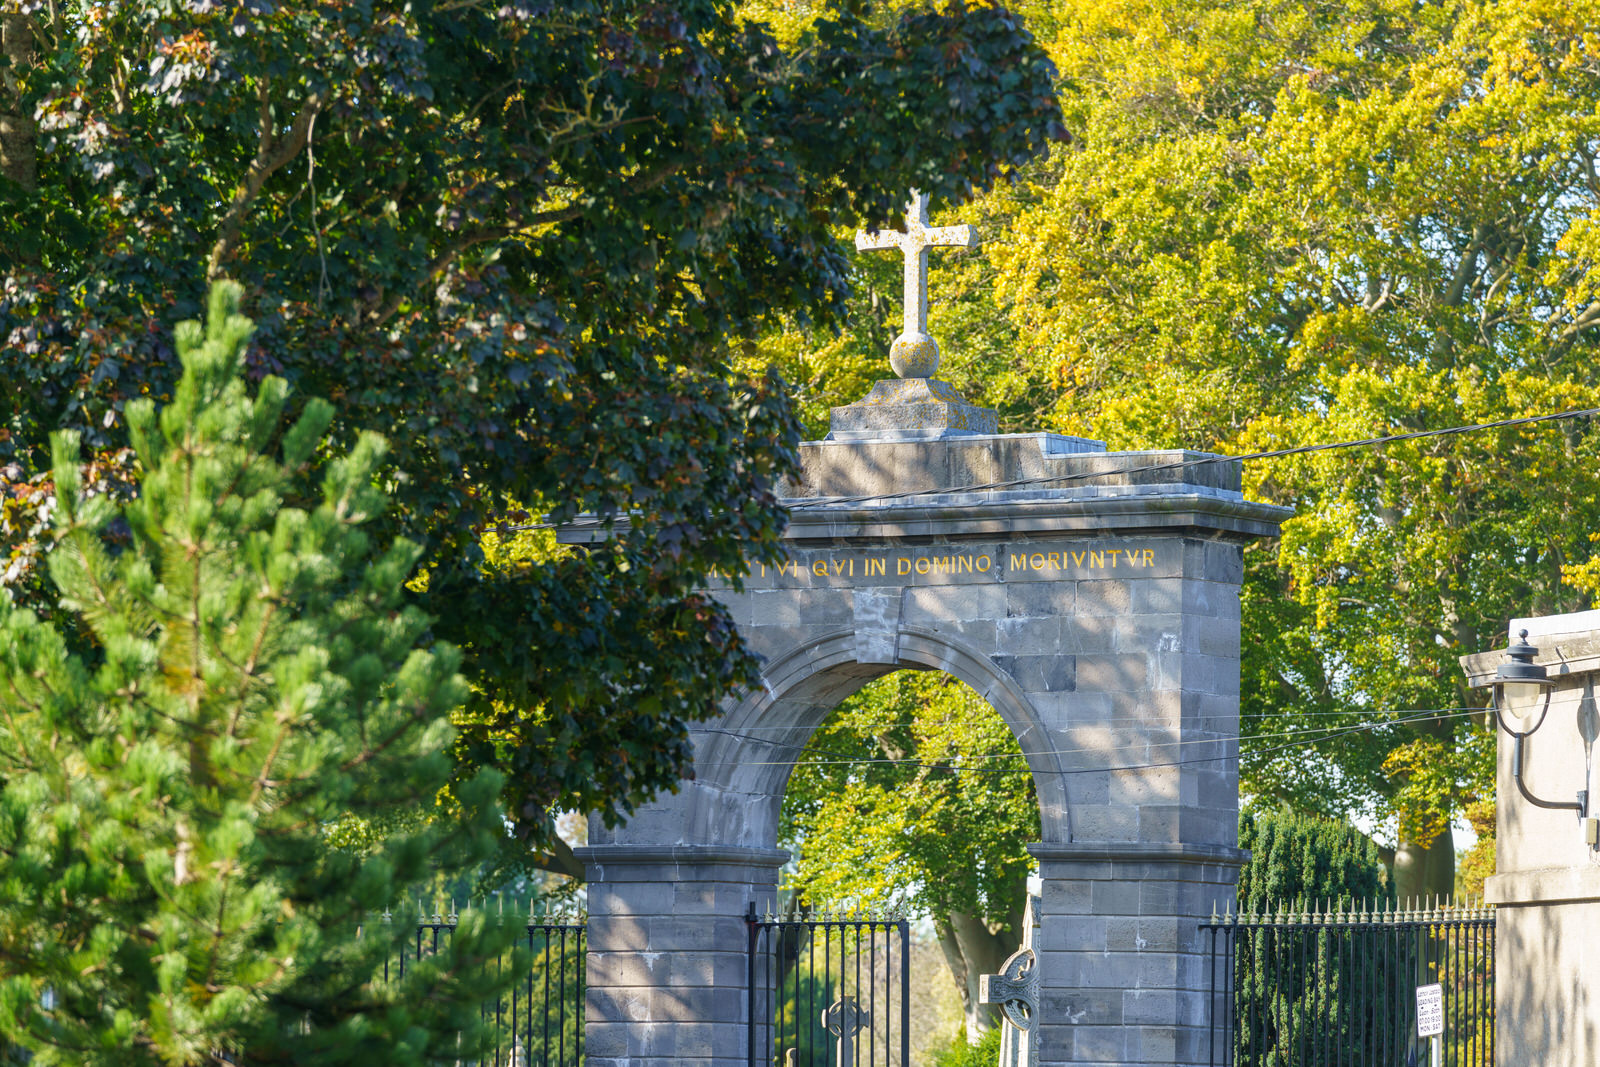 THE OLDER SECTION OF GLASNEVIN CEMETERY [I USED A SONY 70-200MM GM LENS] 007